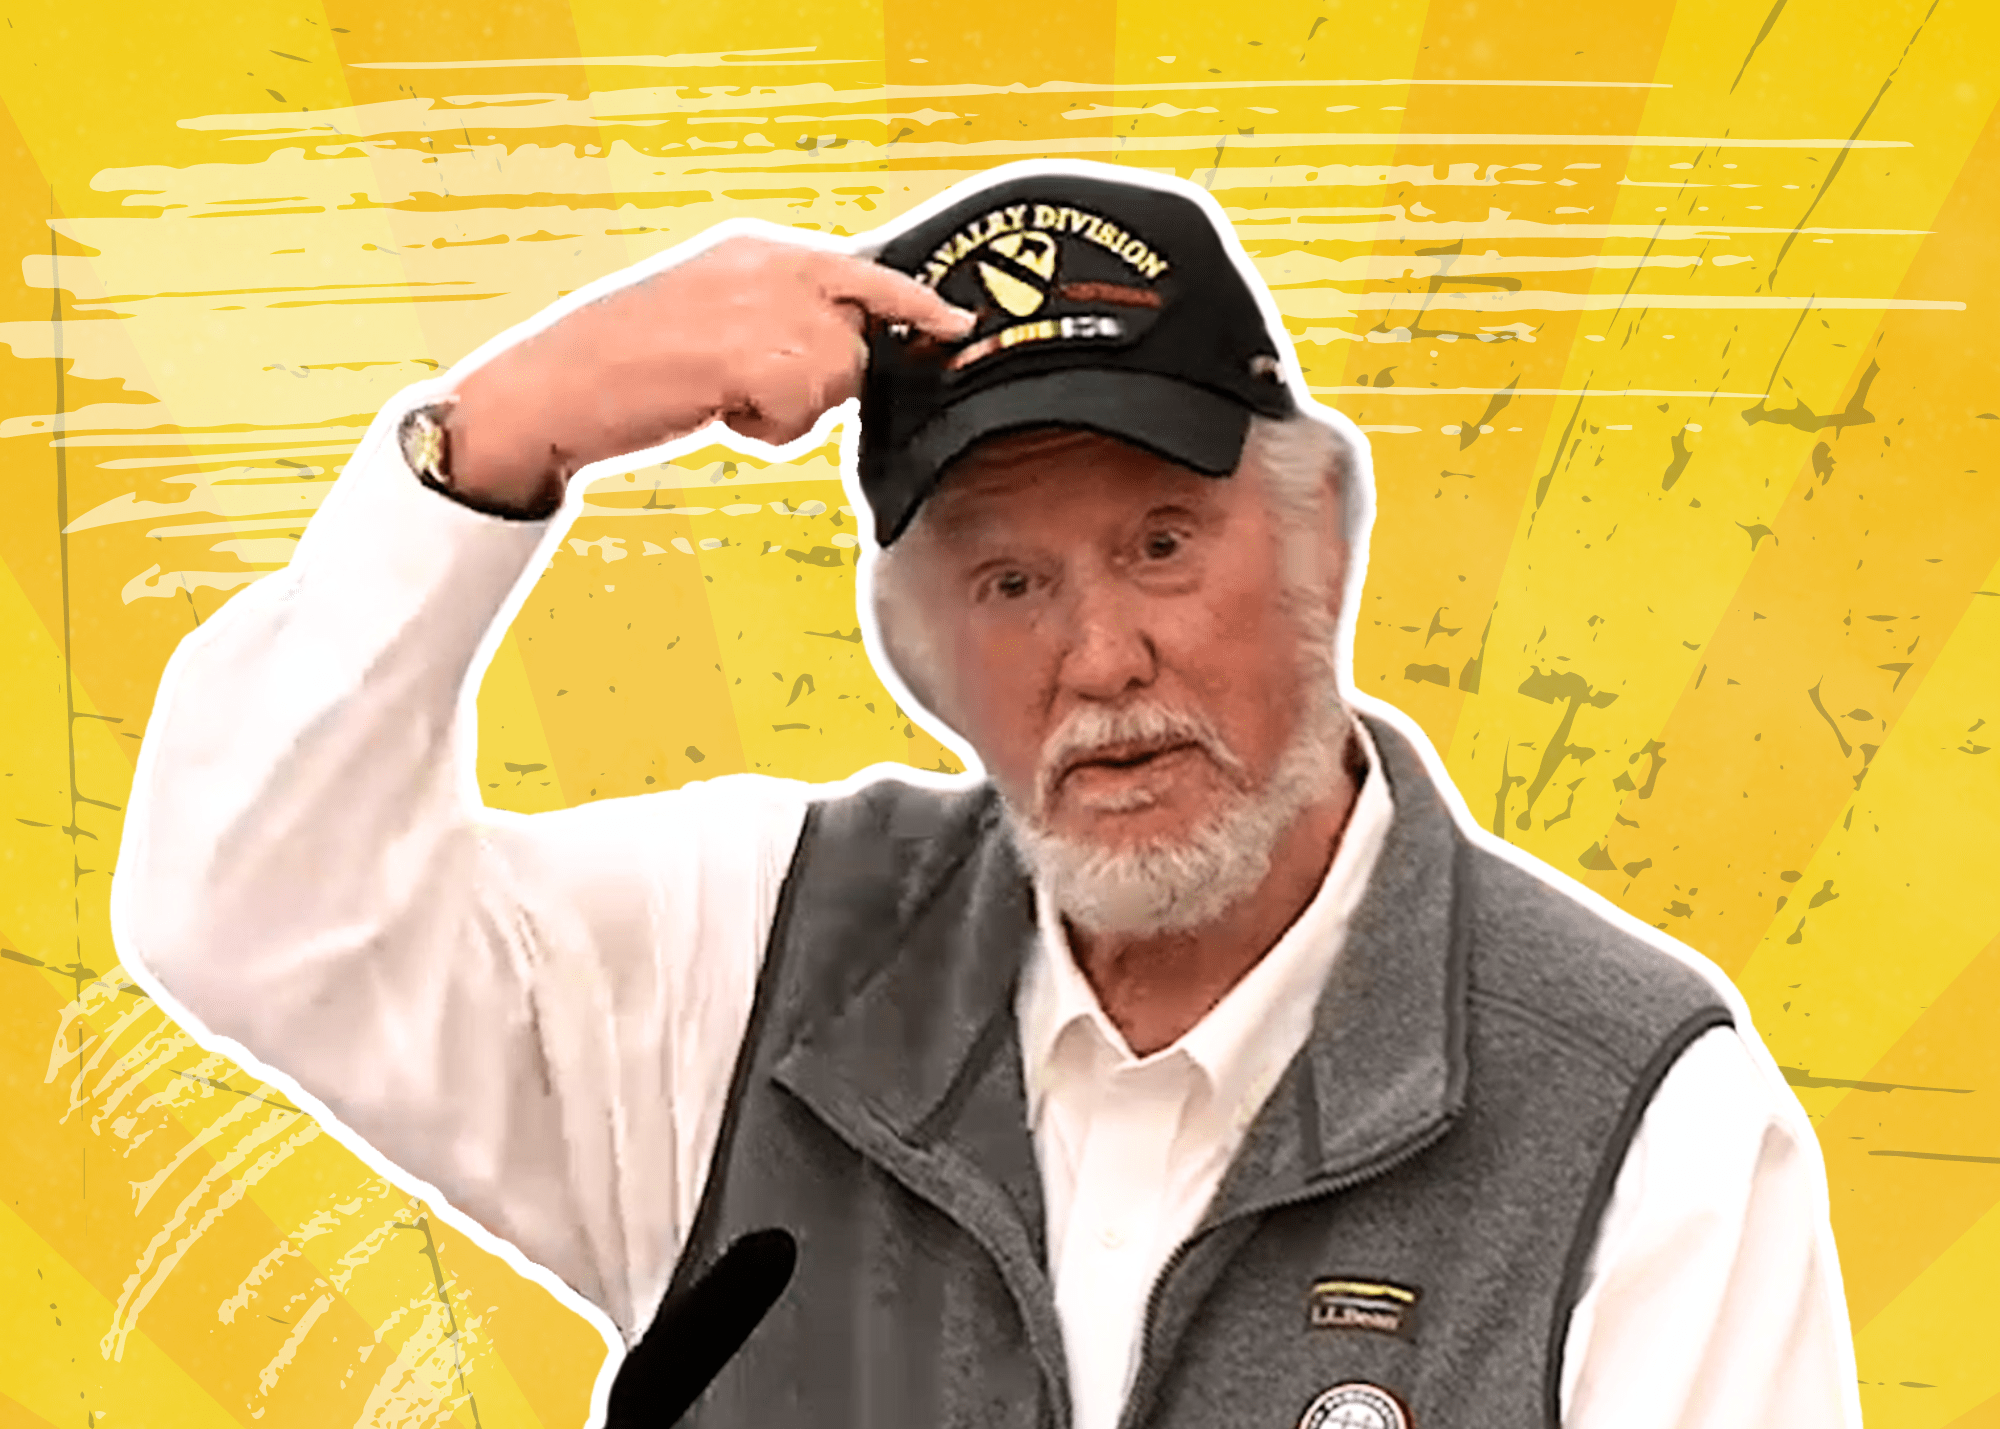 An elderly man in a vest and cap salutes, against a yellow grungy background.